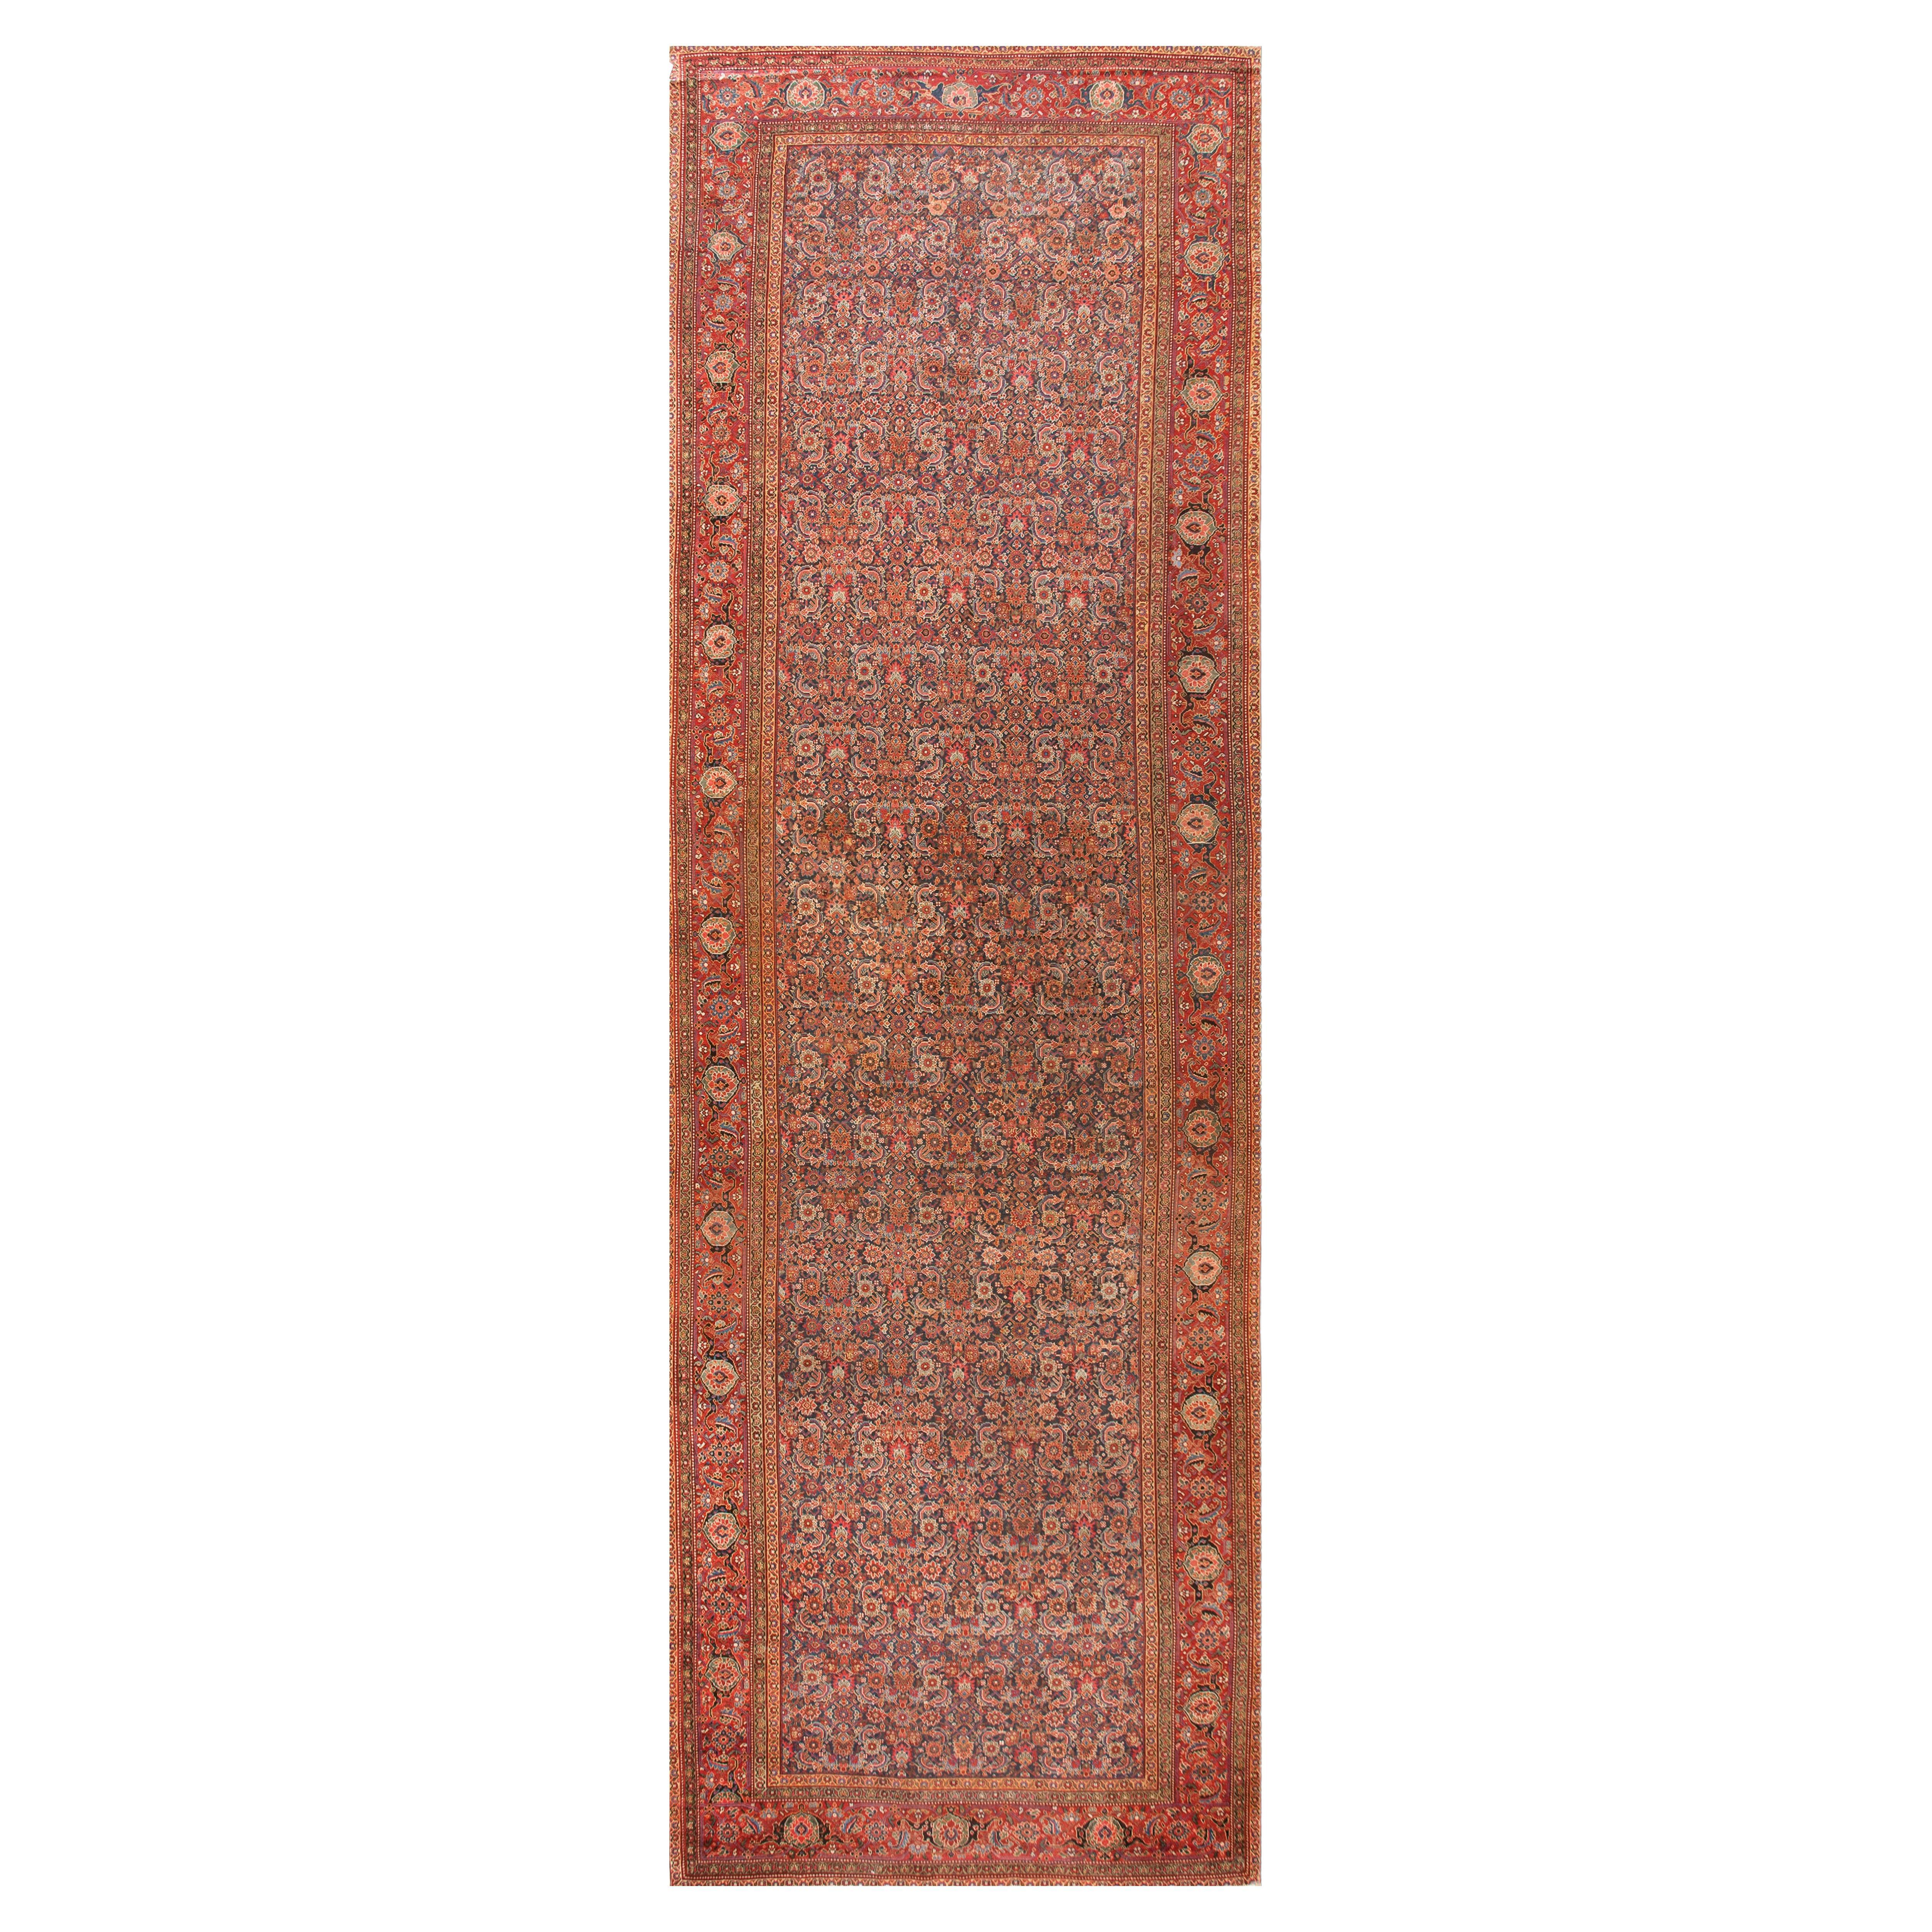 Mid 19th Century NW Persian Galley Carpet ( 7'8" x 22'10" - 234 x 696 )